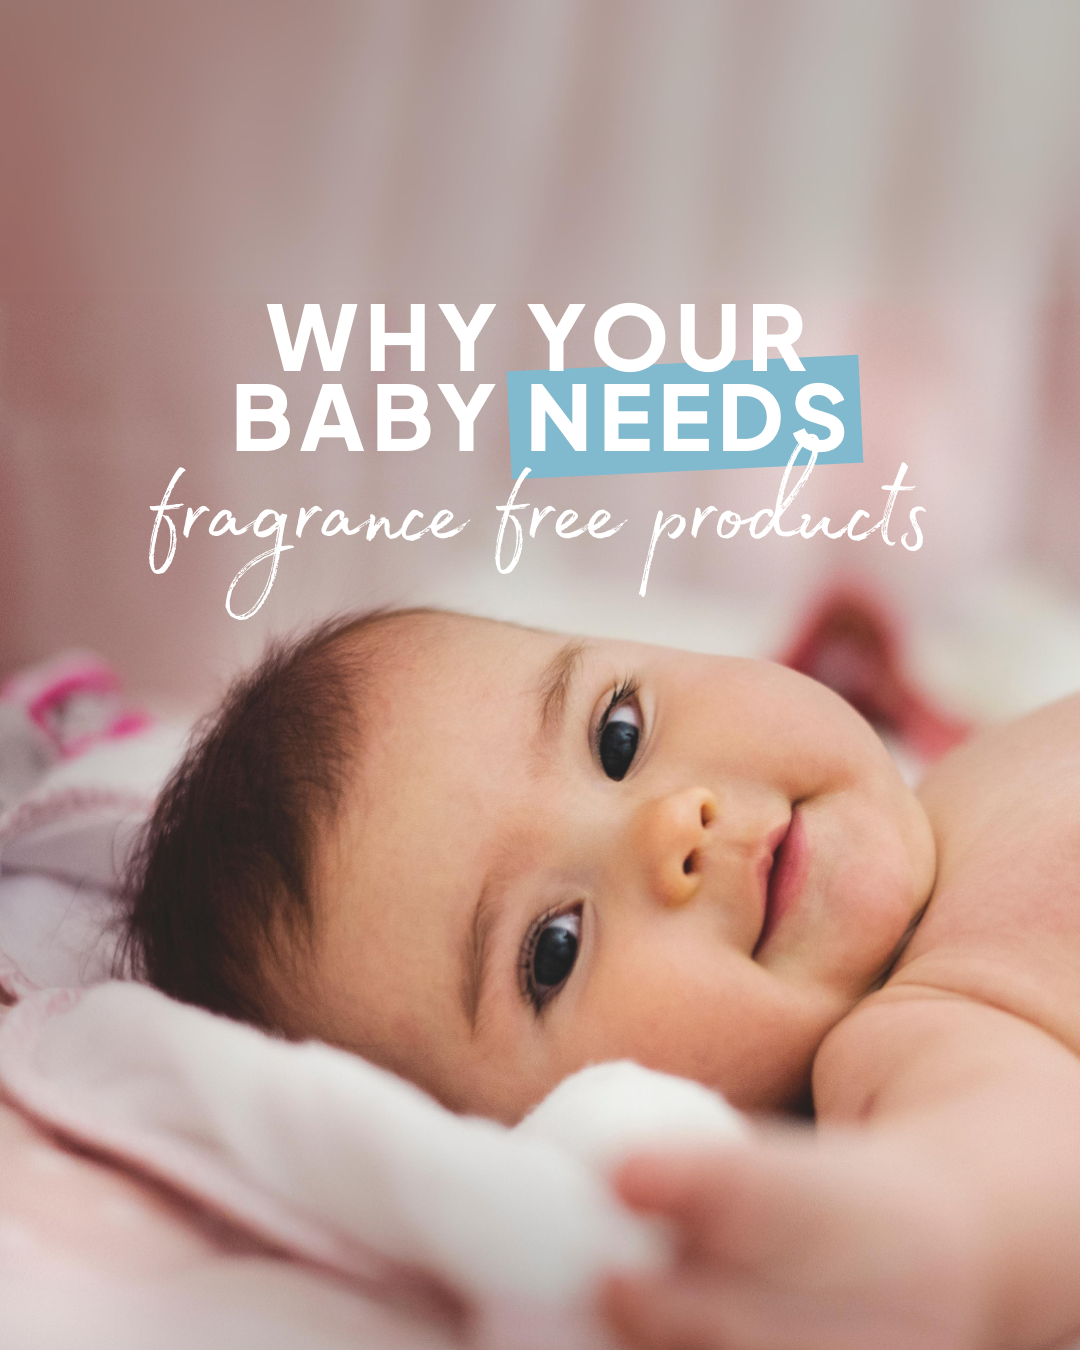 Why you shouldn't use fragranced products for your baby